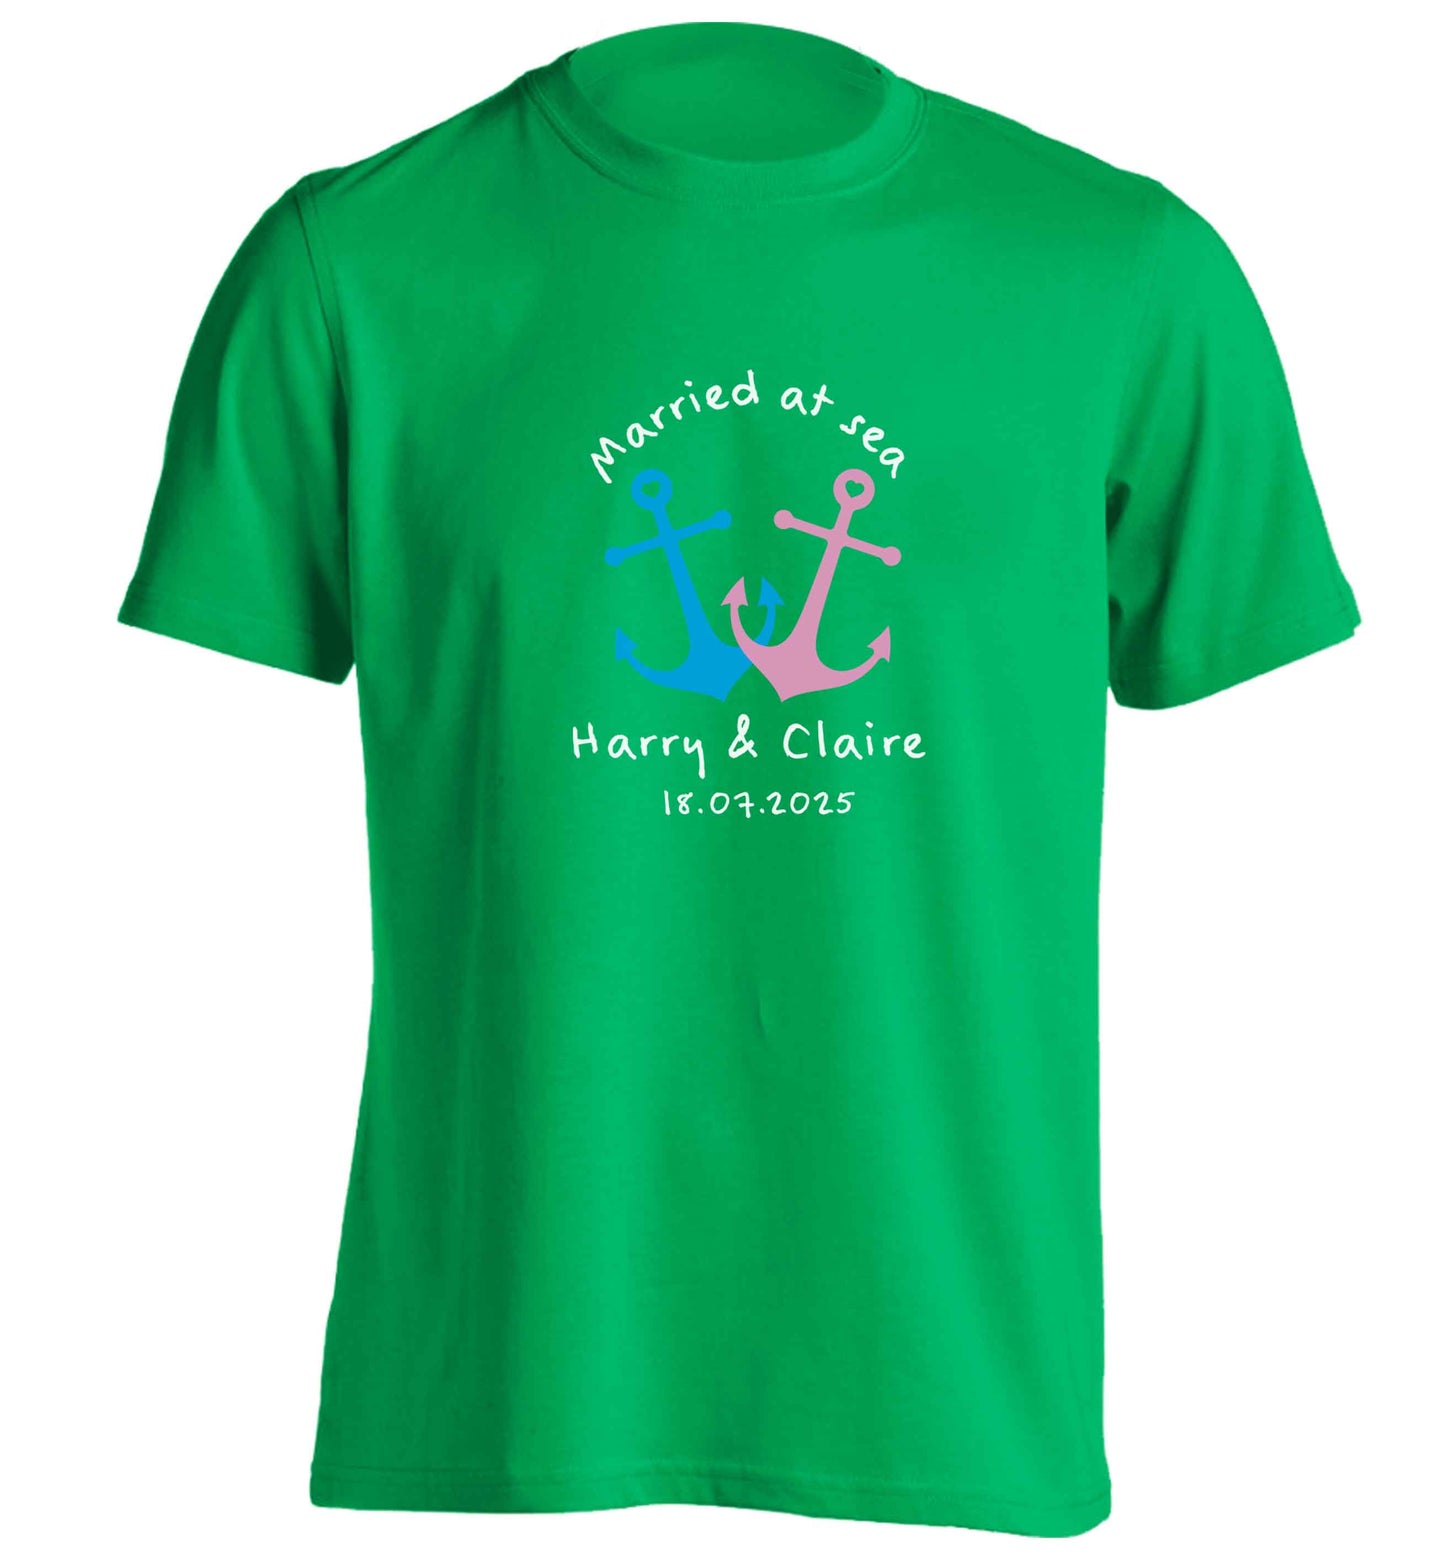 Married at sea adults unisex green Tshirt 2XL